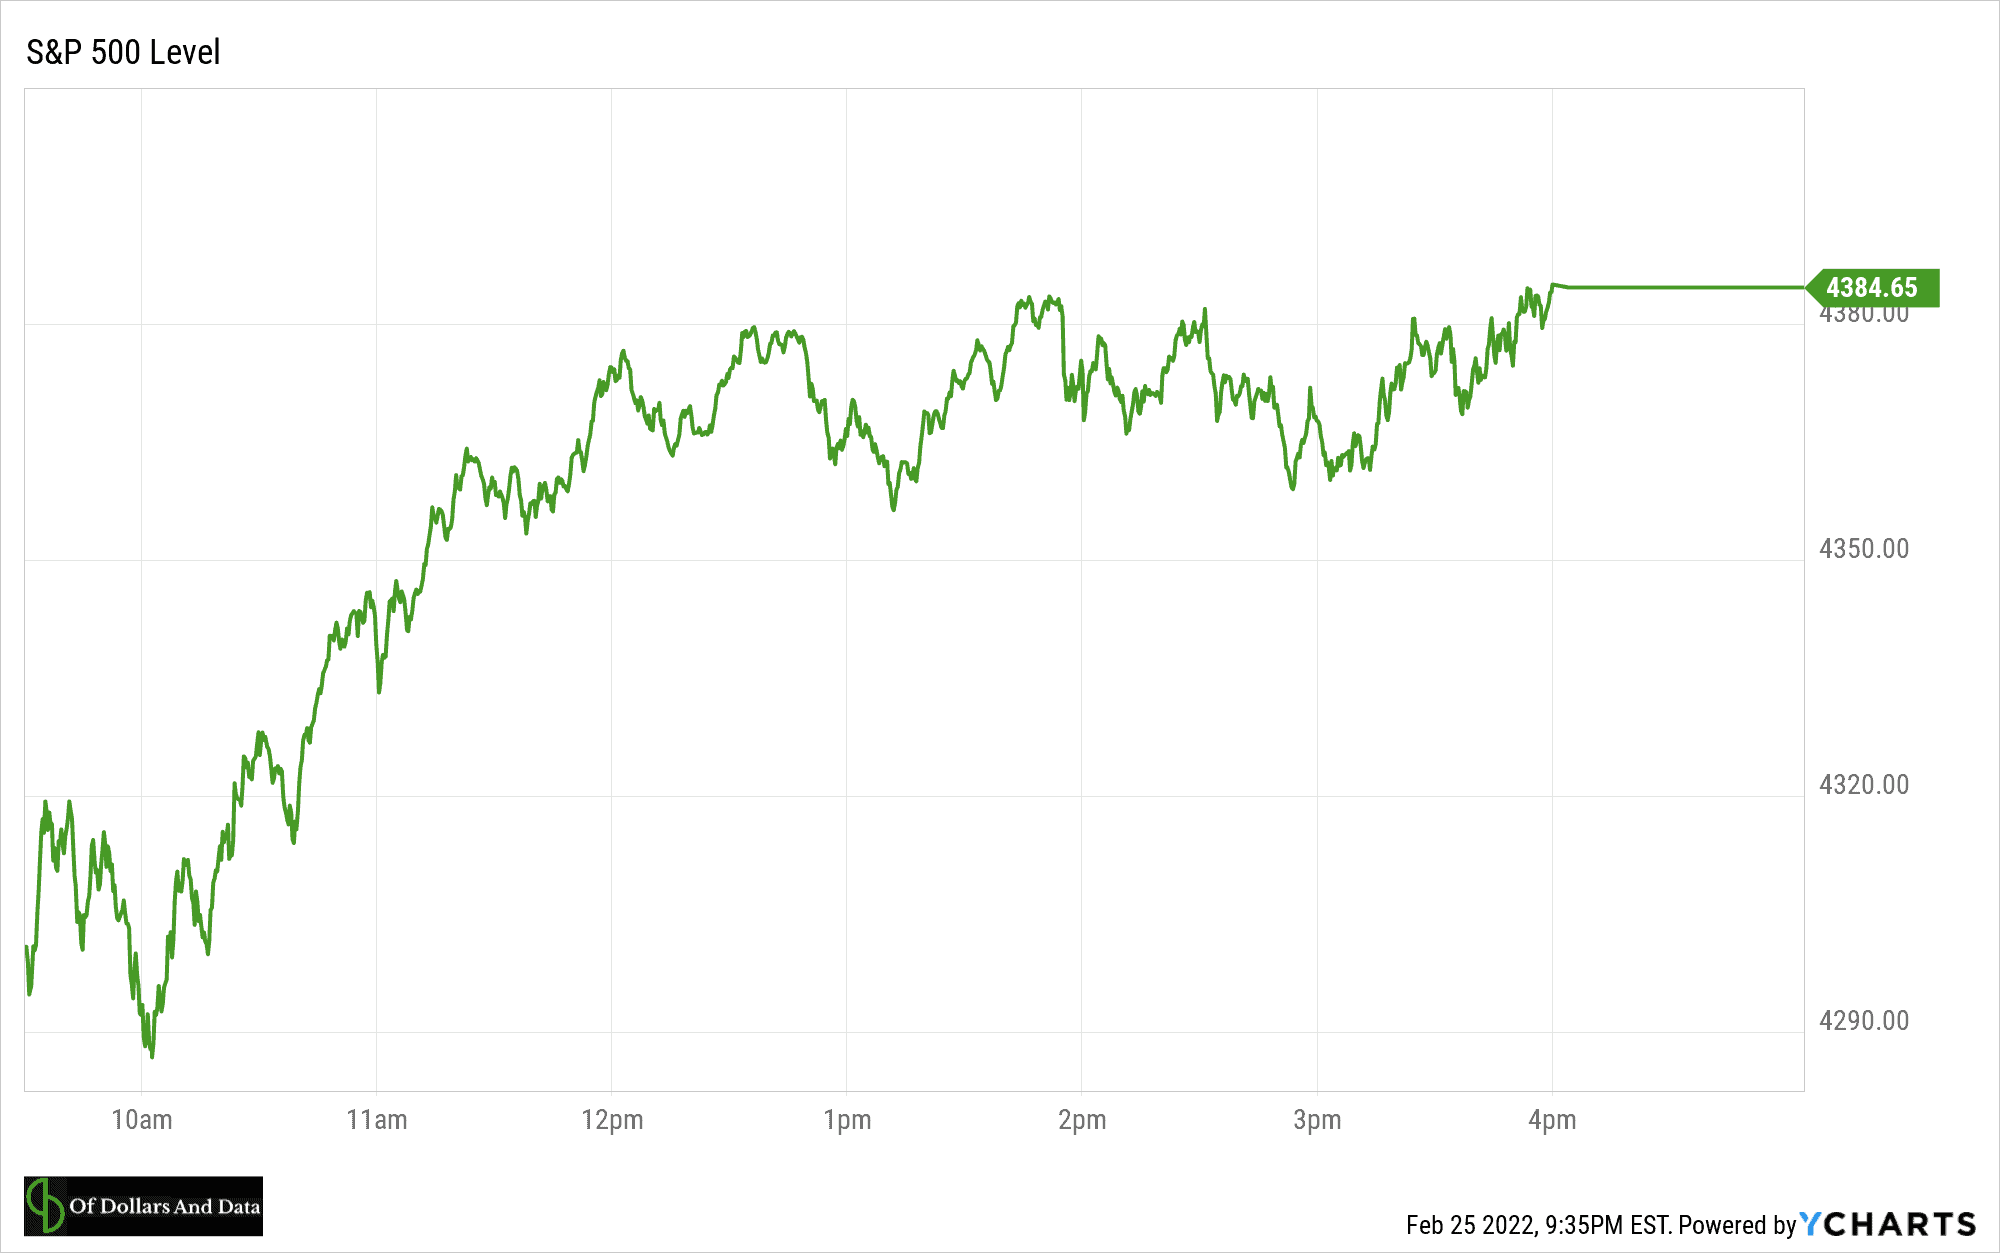 Chart of the S&P 500 finishing up despite worsening news about the war in Ukraine.